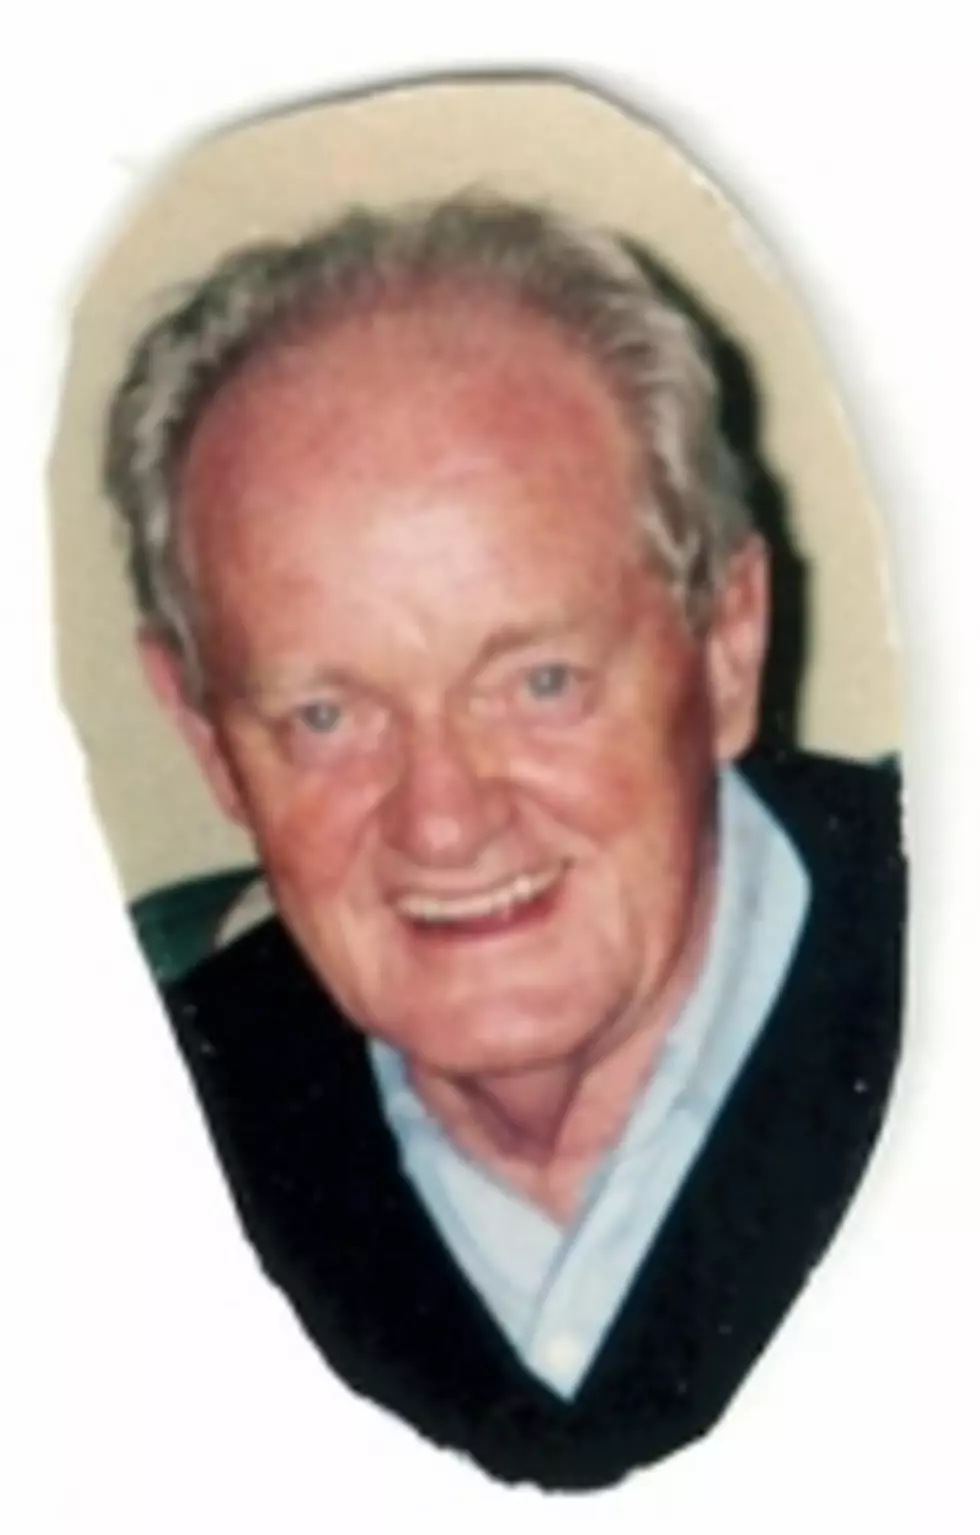 Patrick Weir, a Poughquag Resident, Dies at 80